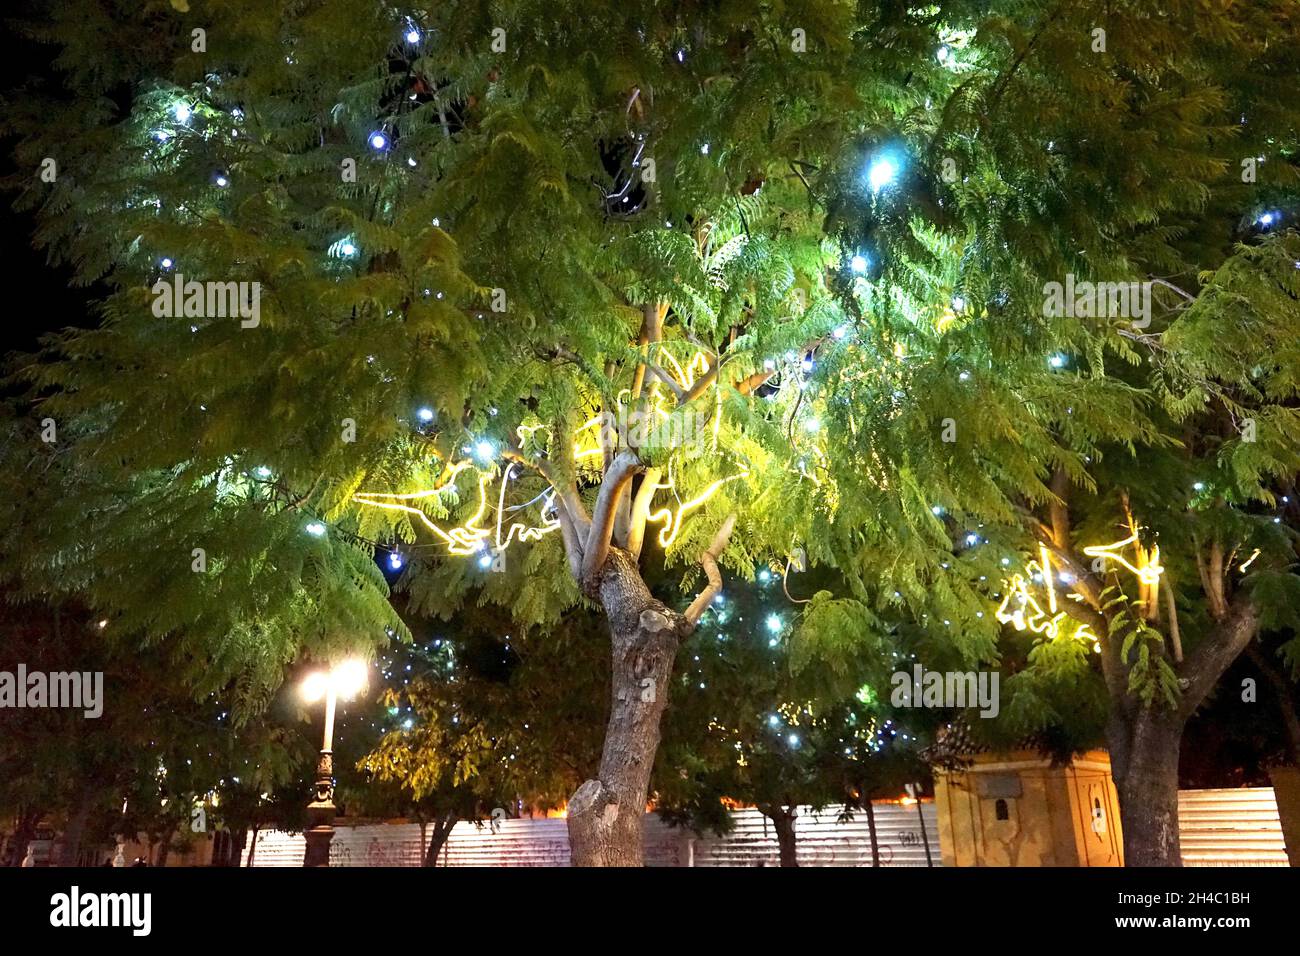 Christmas in Malaga, Spain:  Christmas lights in green trees Stock Photo